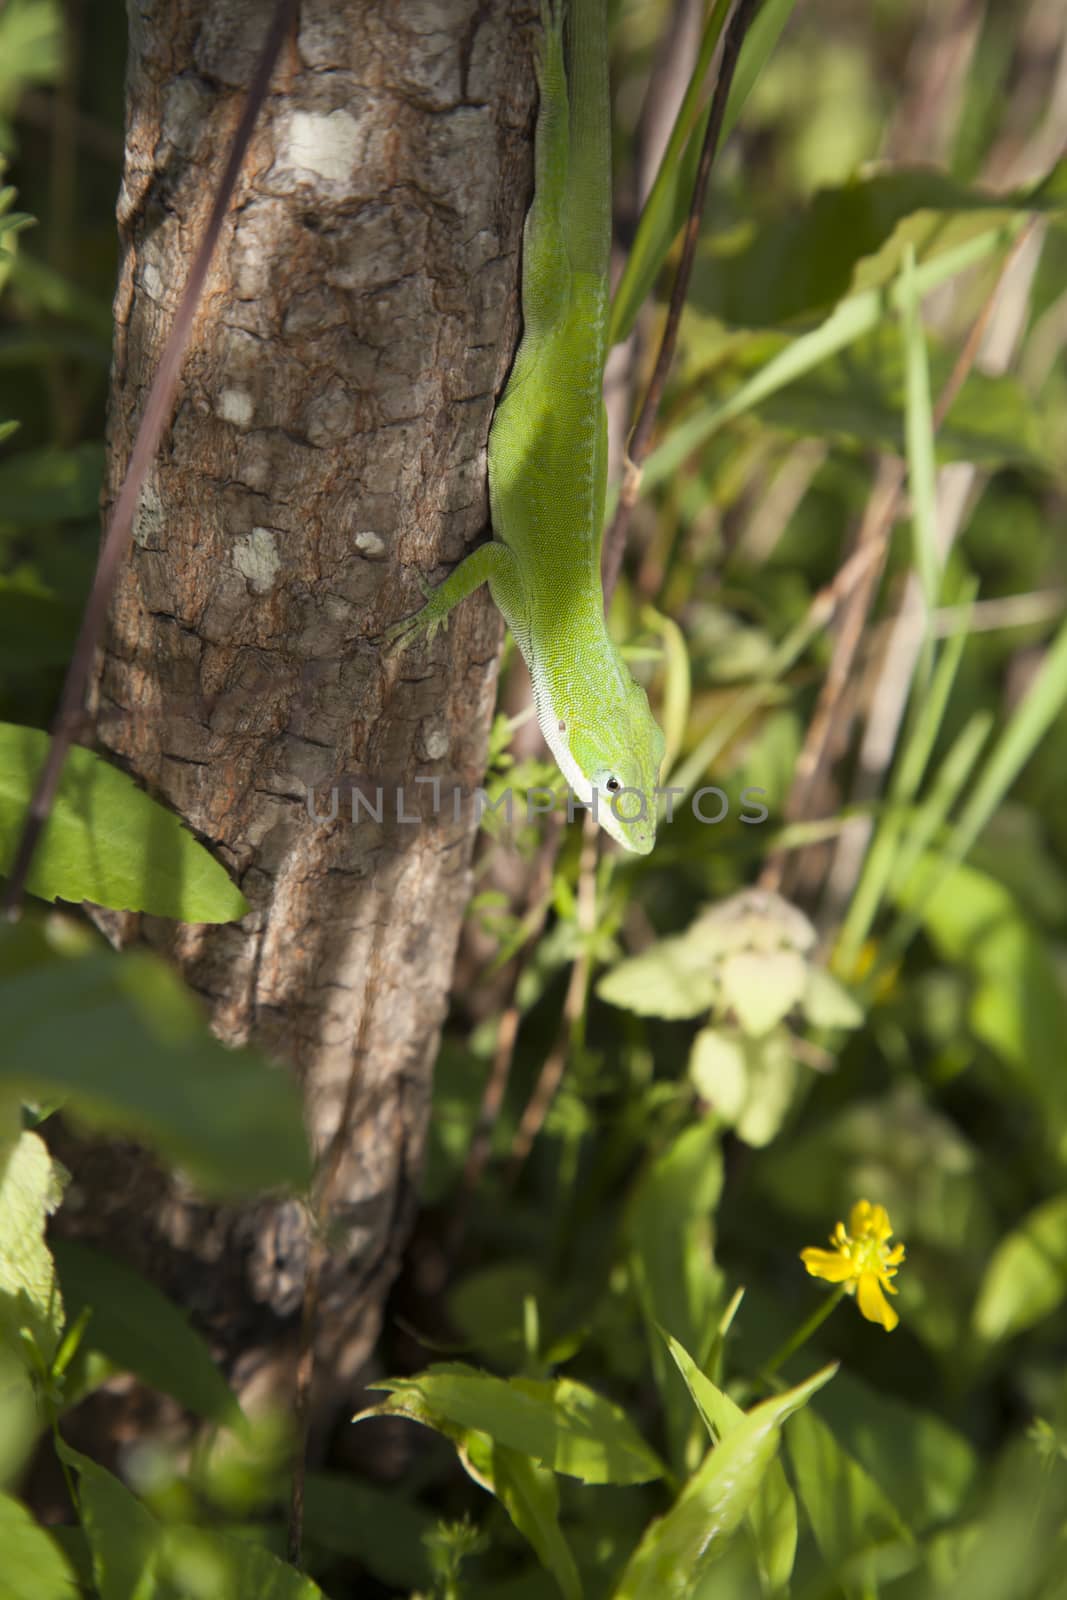 Green anole (Anolis carolinensis) scurrying down a small tree trunk